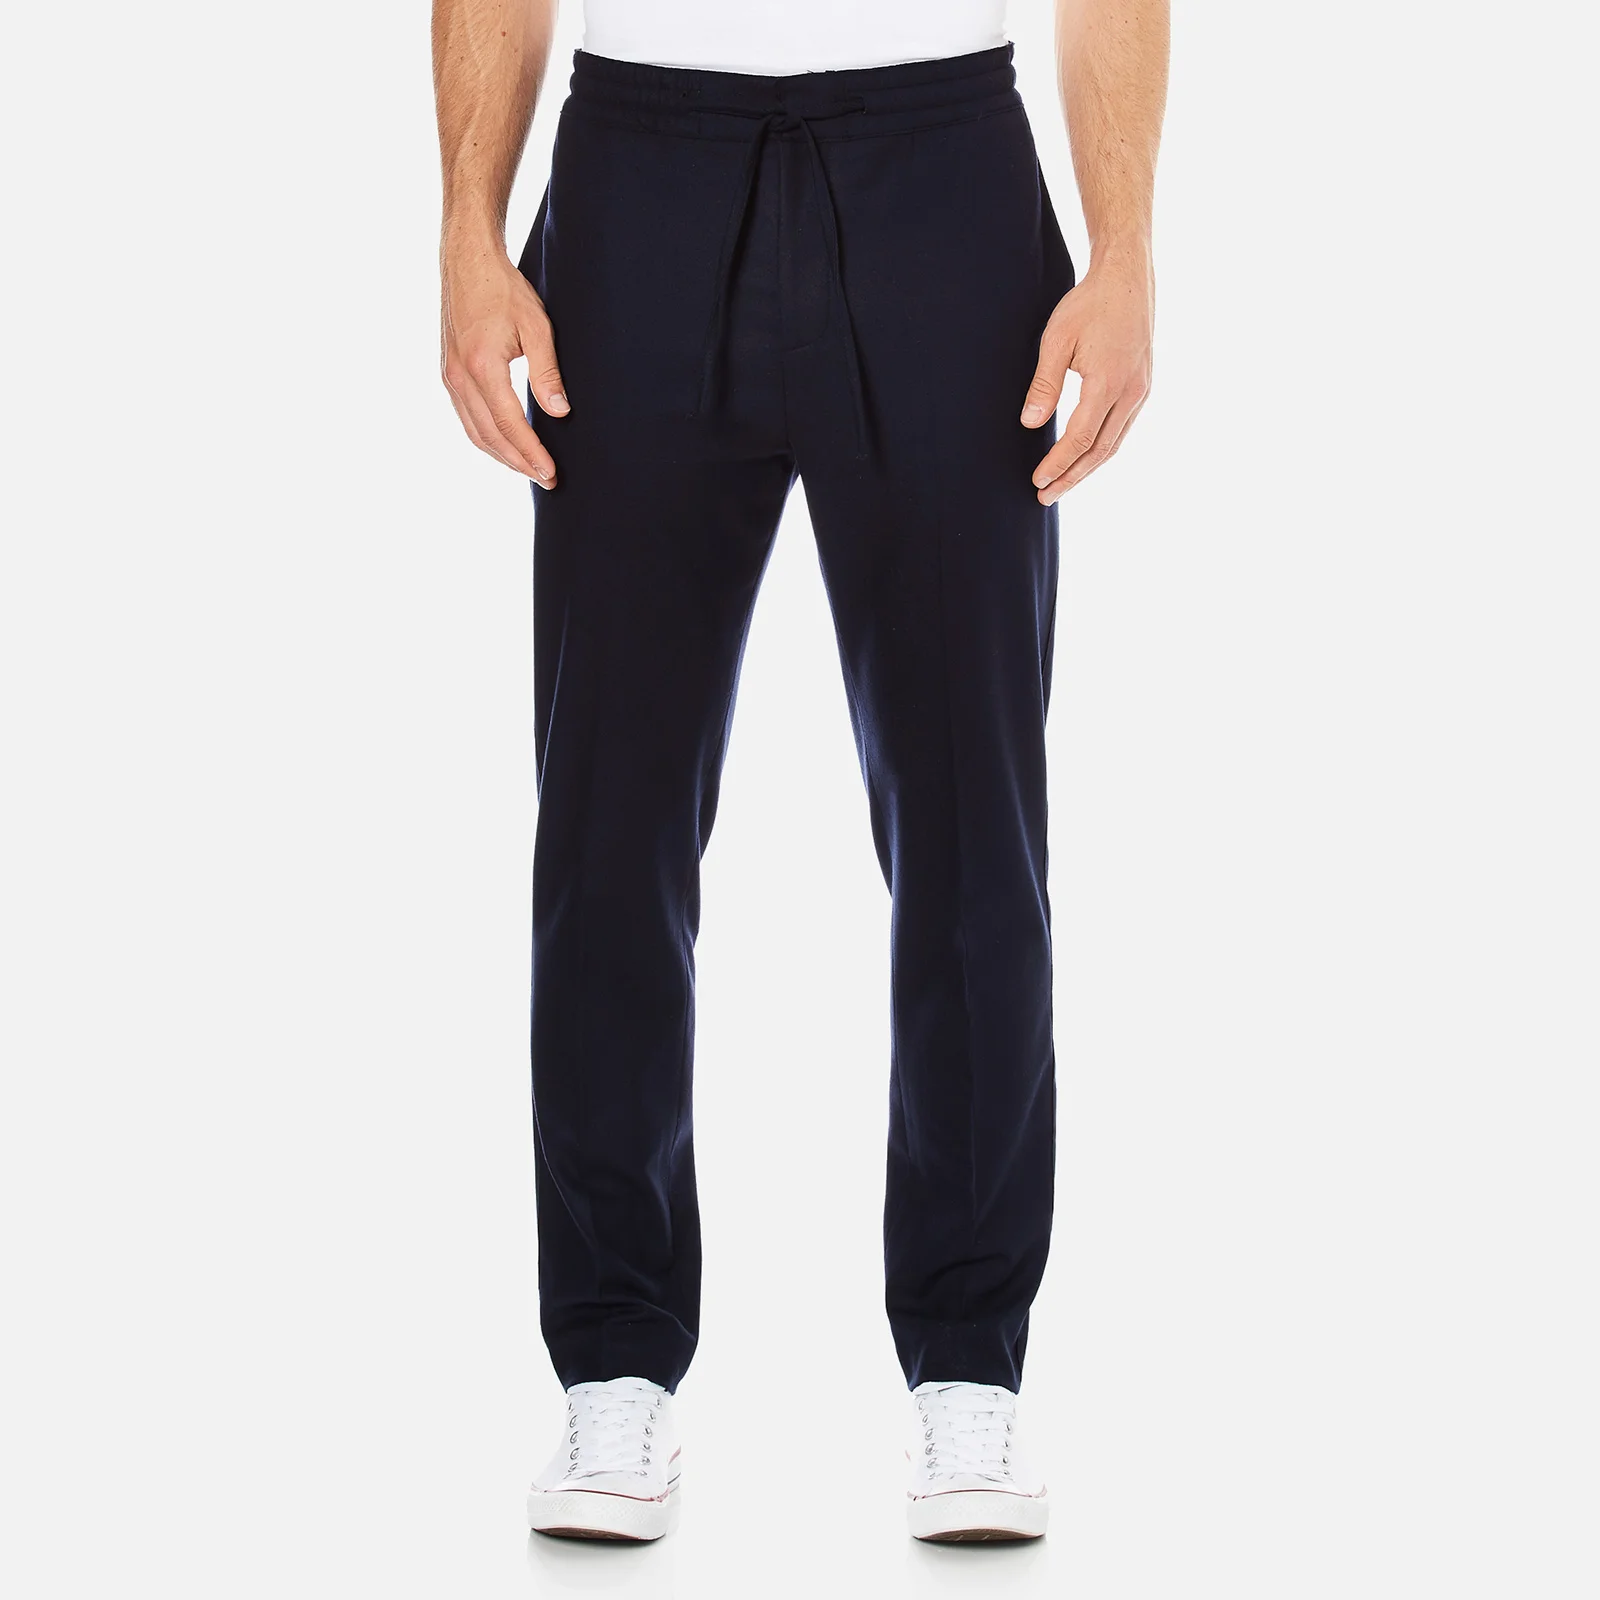 MSGM Men's Casual Fit Trousers - Navy Image 1